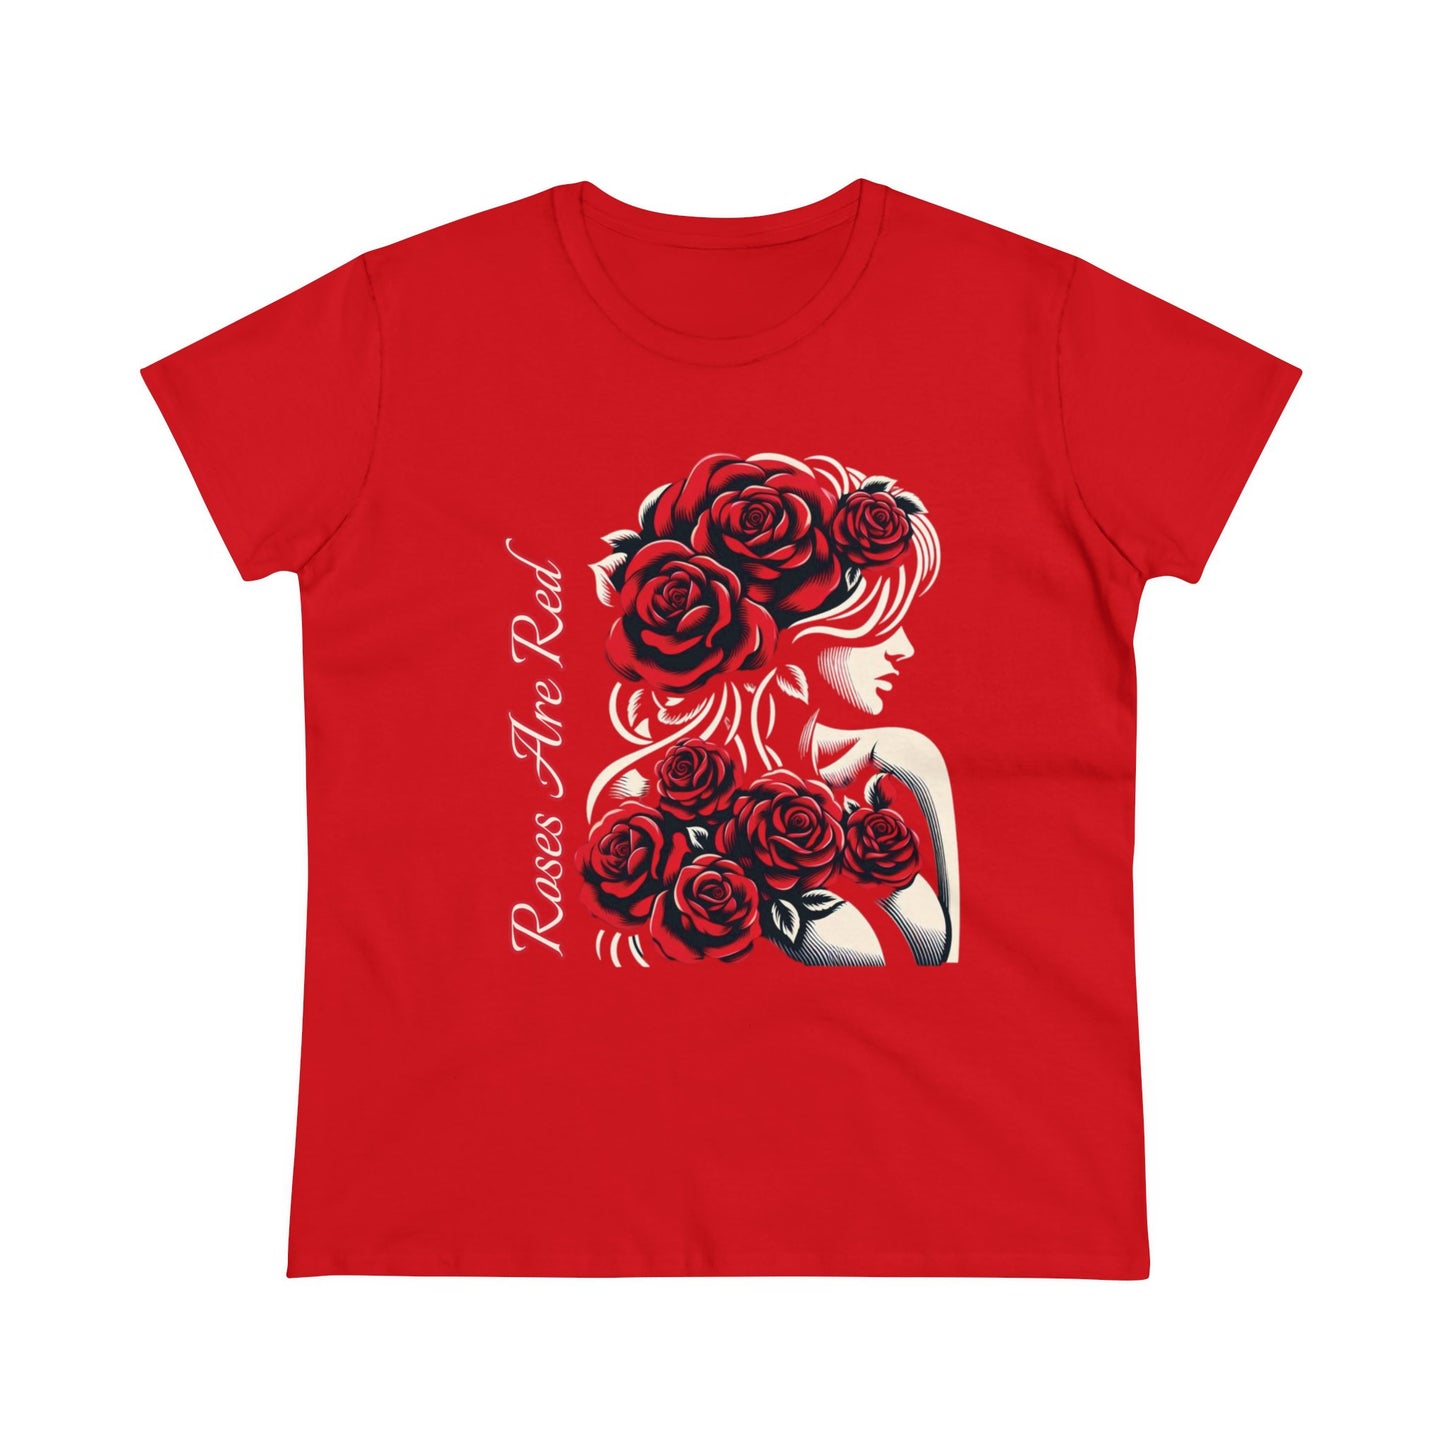 Rosy Radiance: Floral Femme Fatale Women's Midweight Cotton Tee